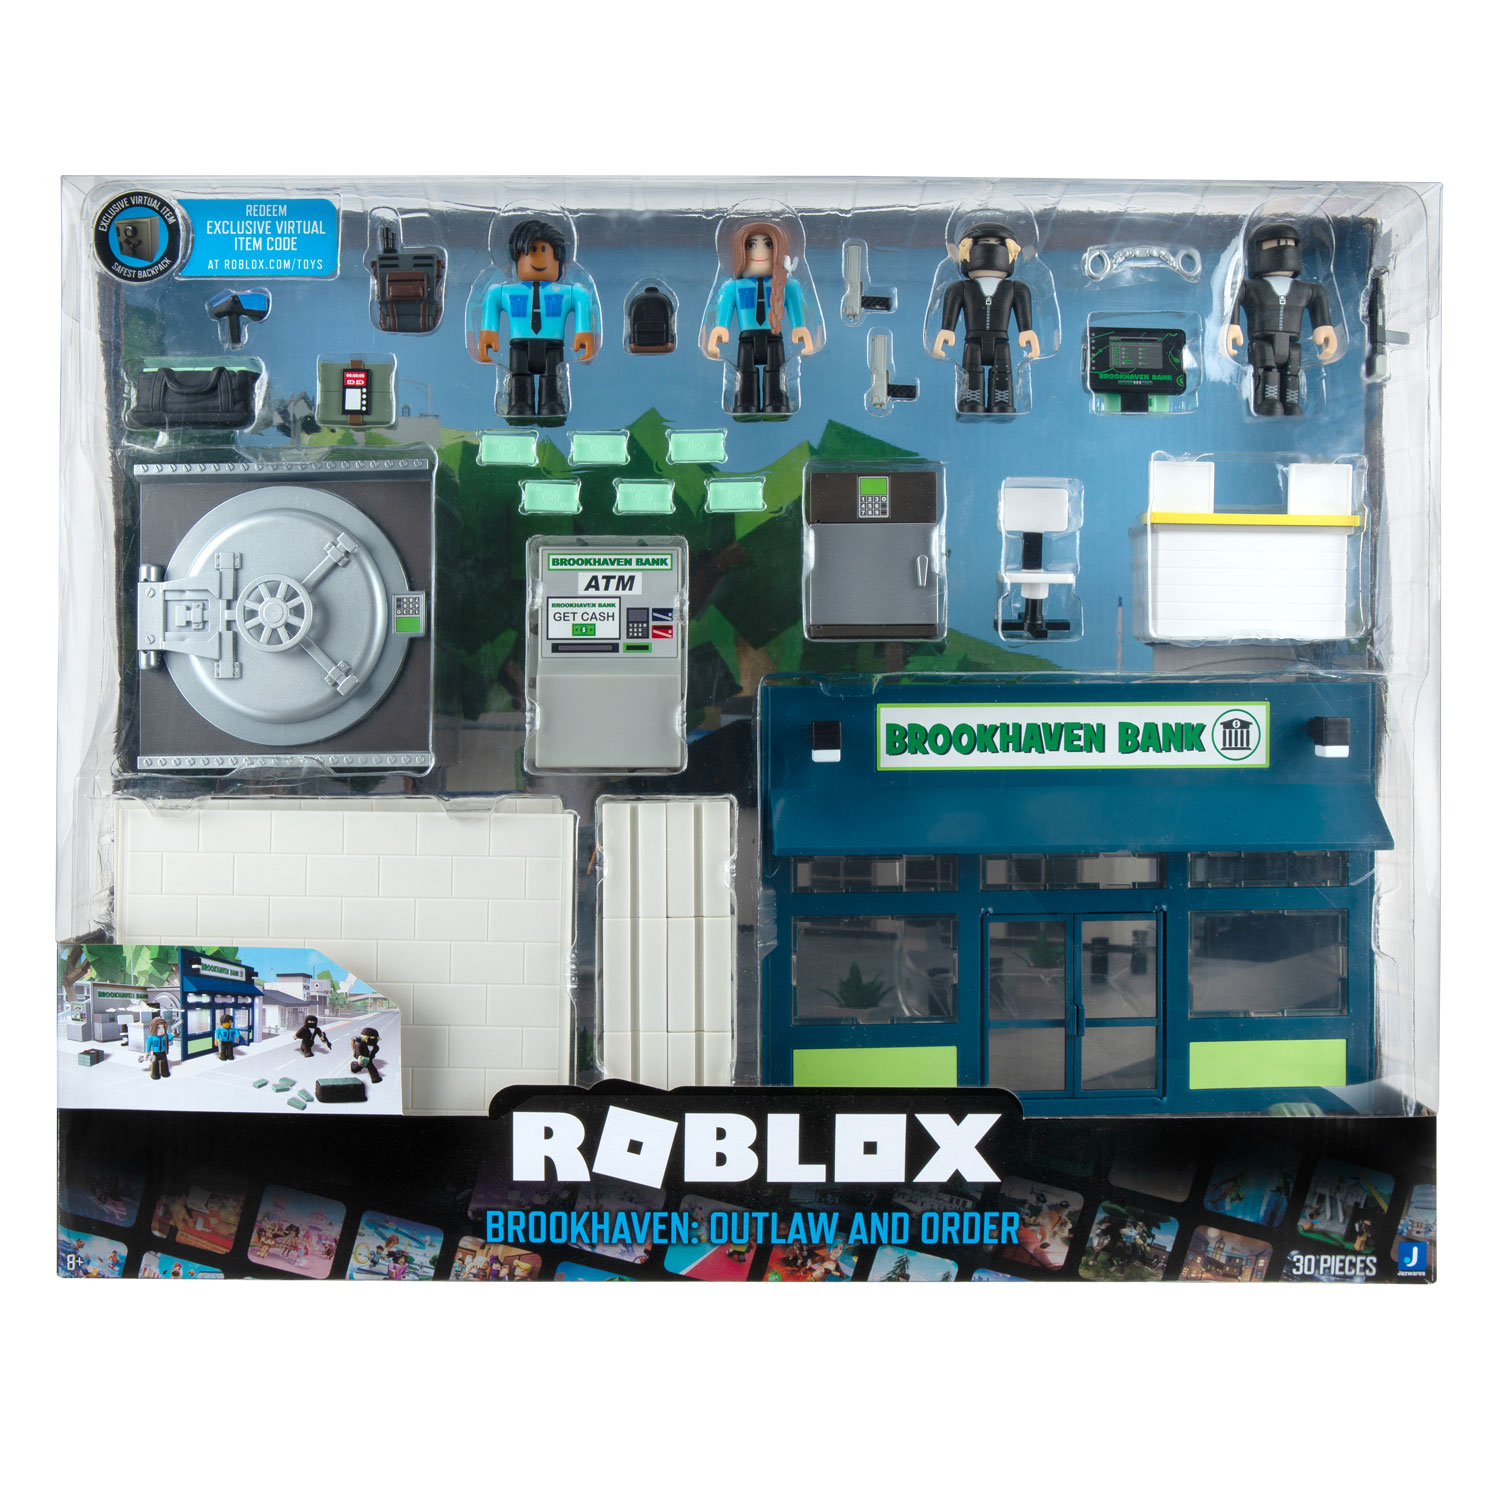 Roblox Brookhaven Outlaw and Order W12 Speelset